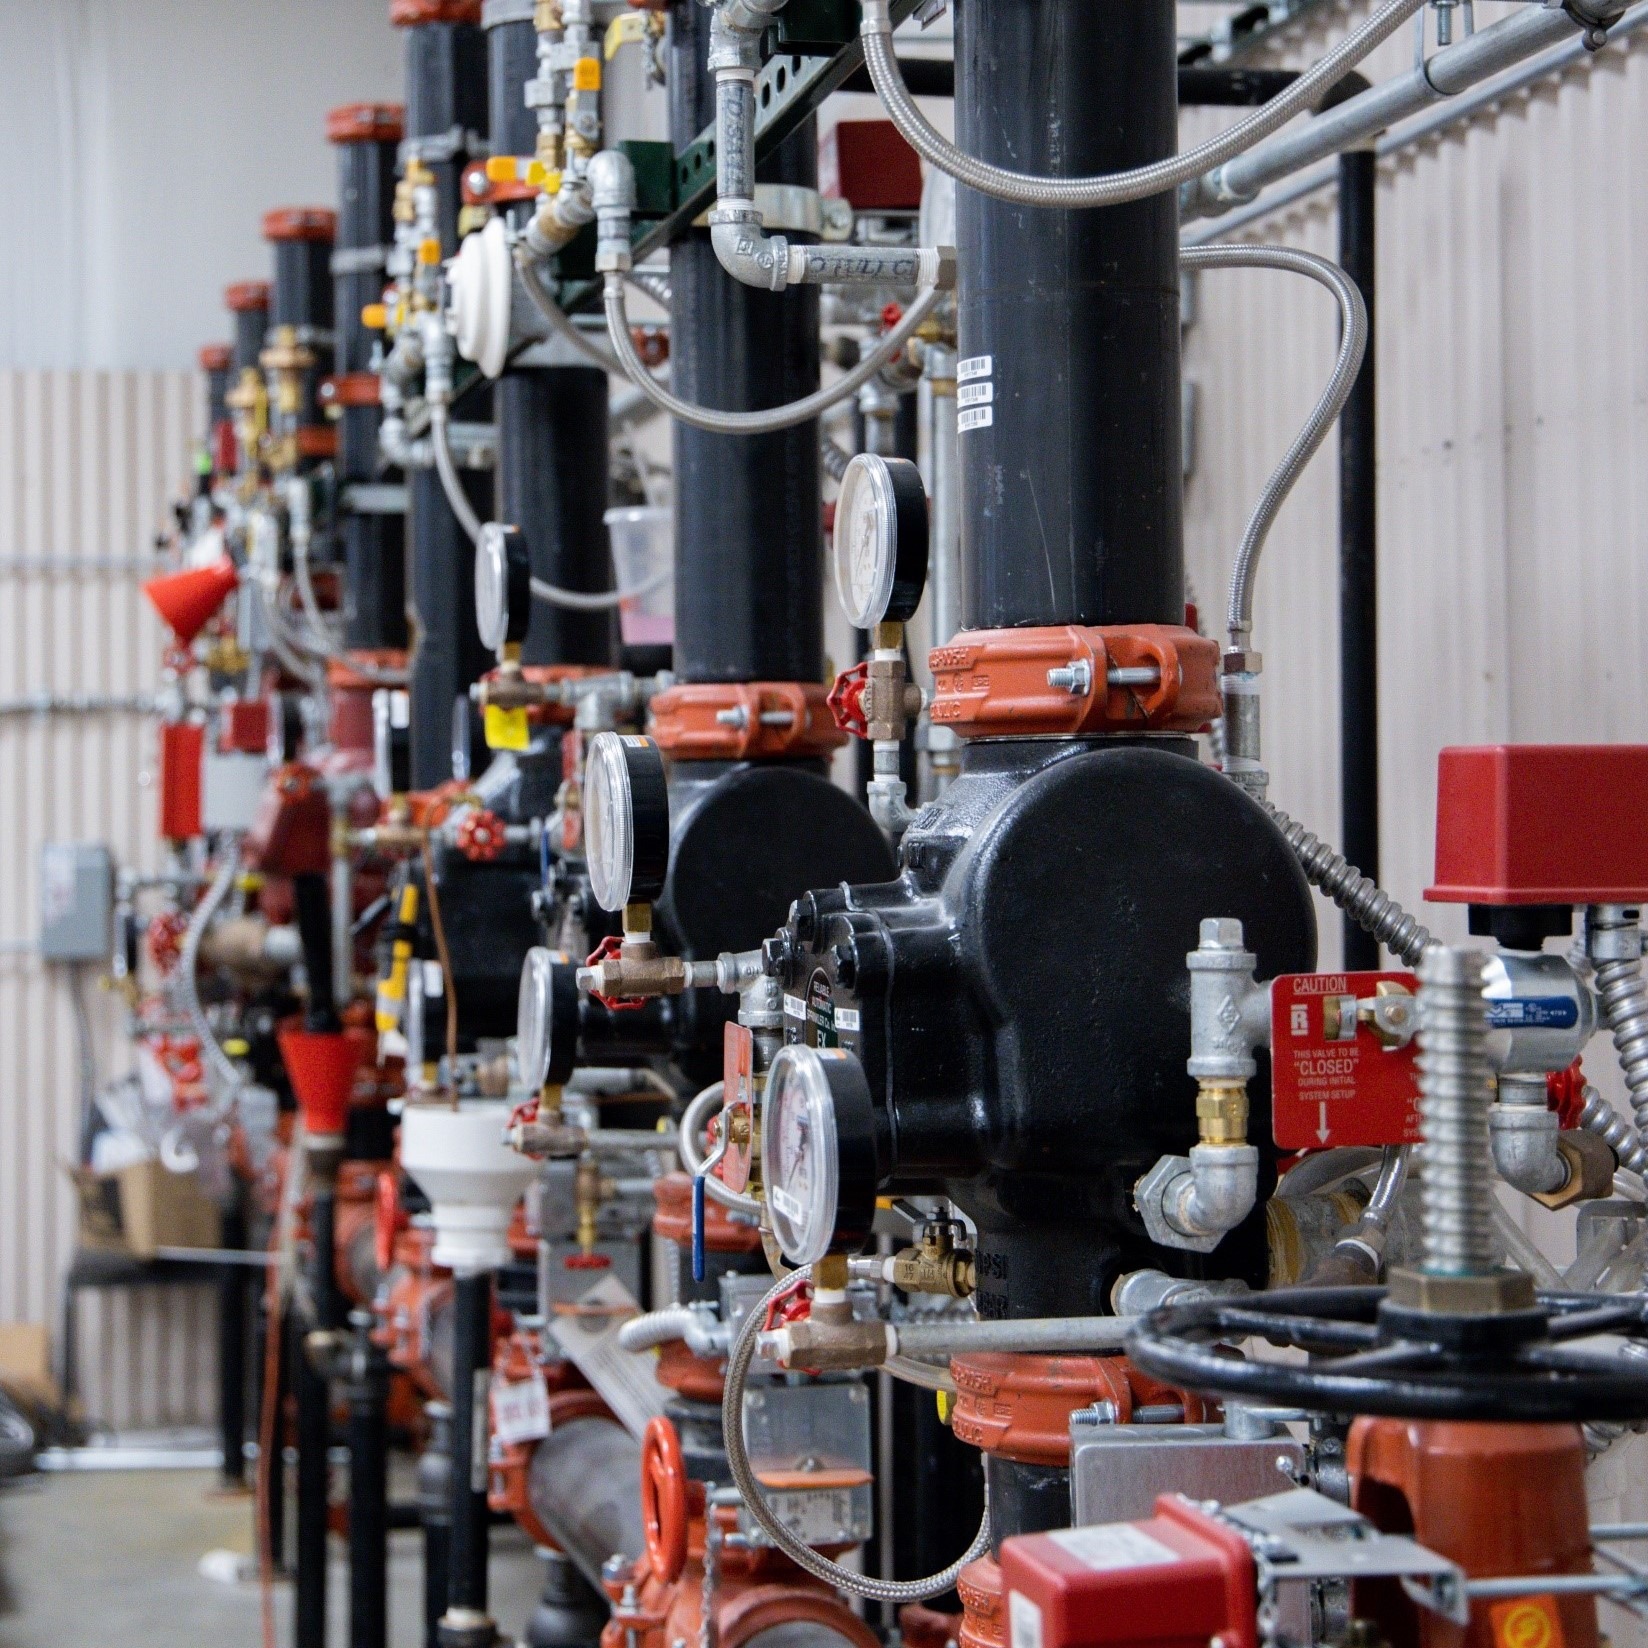 Wet vs. Dry Fire Sprinkler System: Which is More Effective?